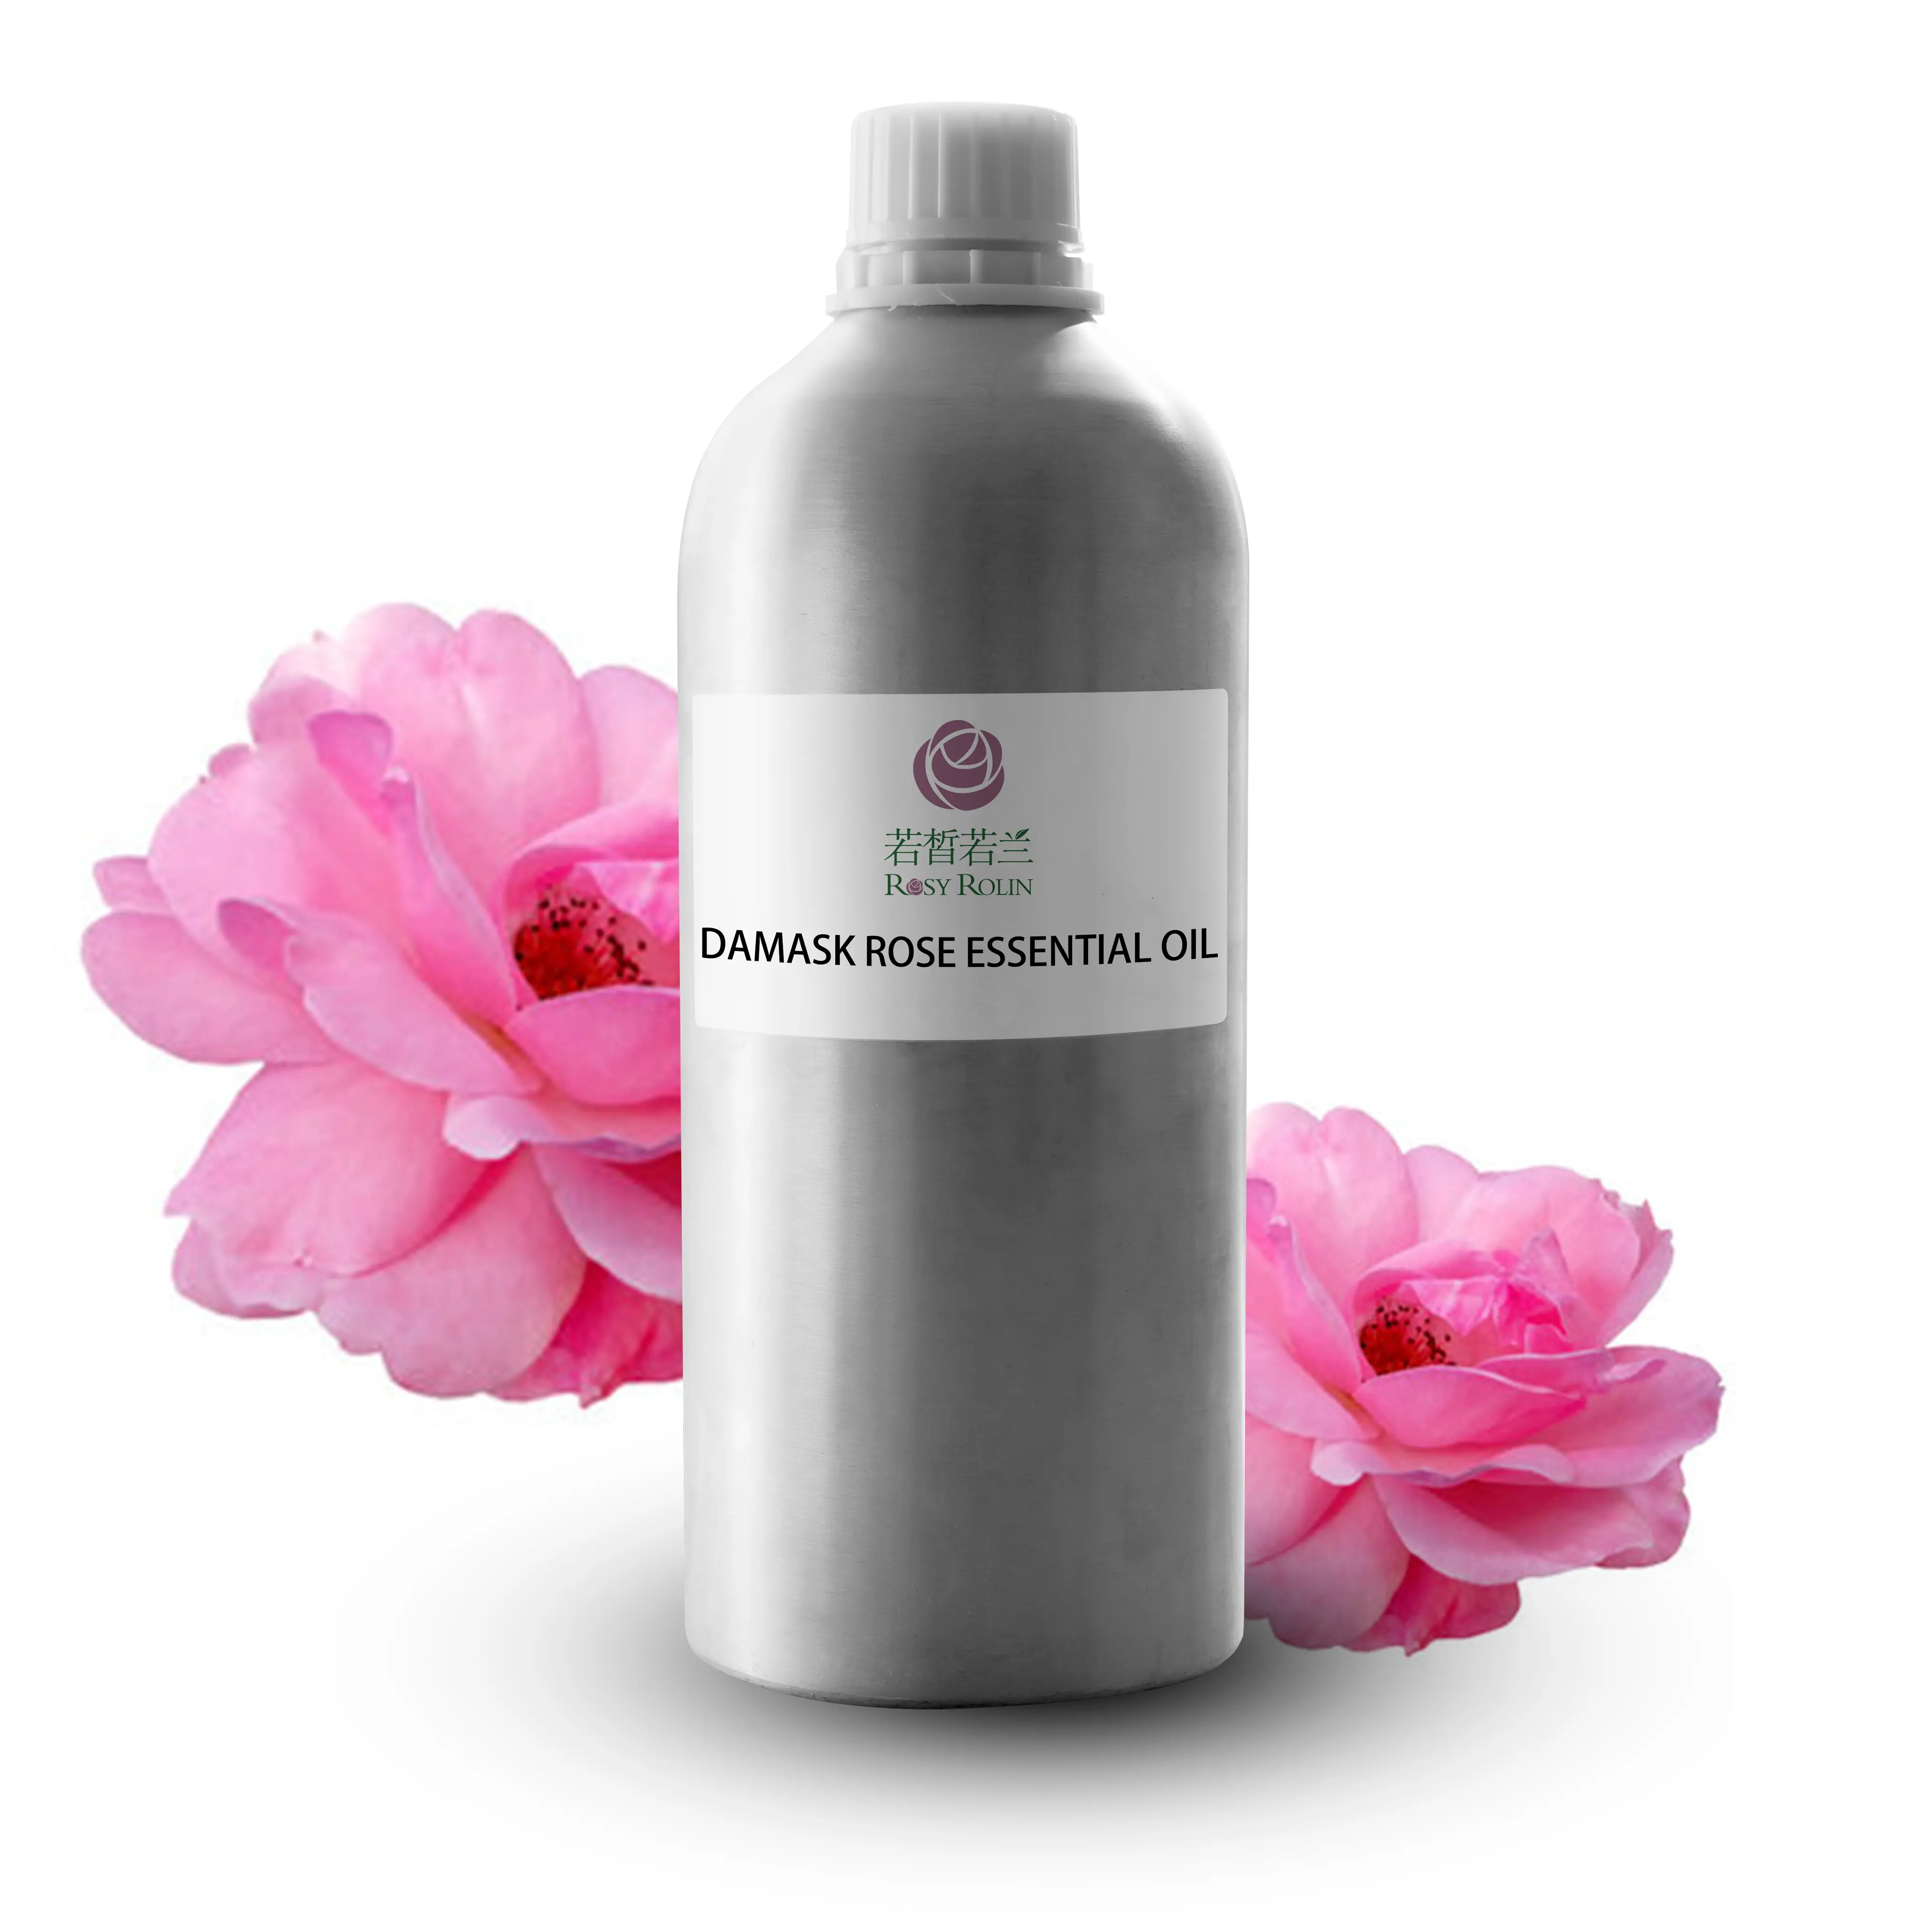 Factory wholesale 100% pure Waterless organic natural damask rose essential oil bulk rose oil for skin care perfume candle oil